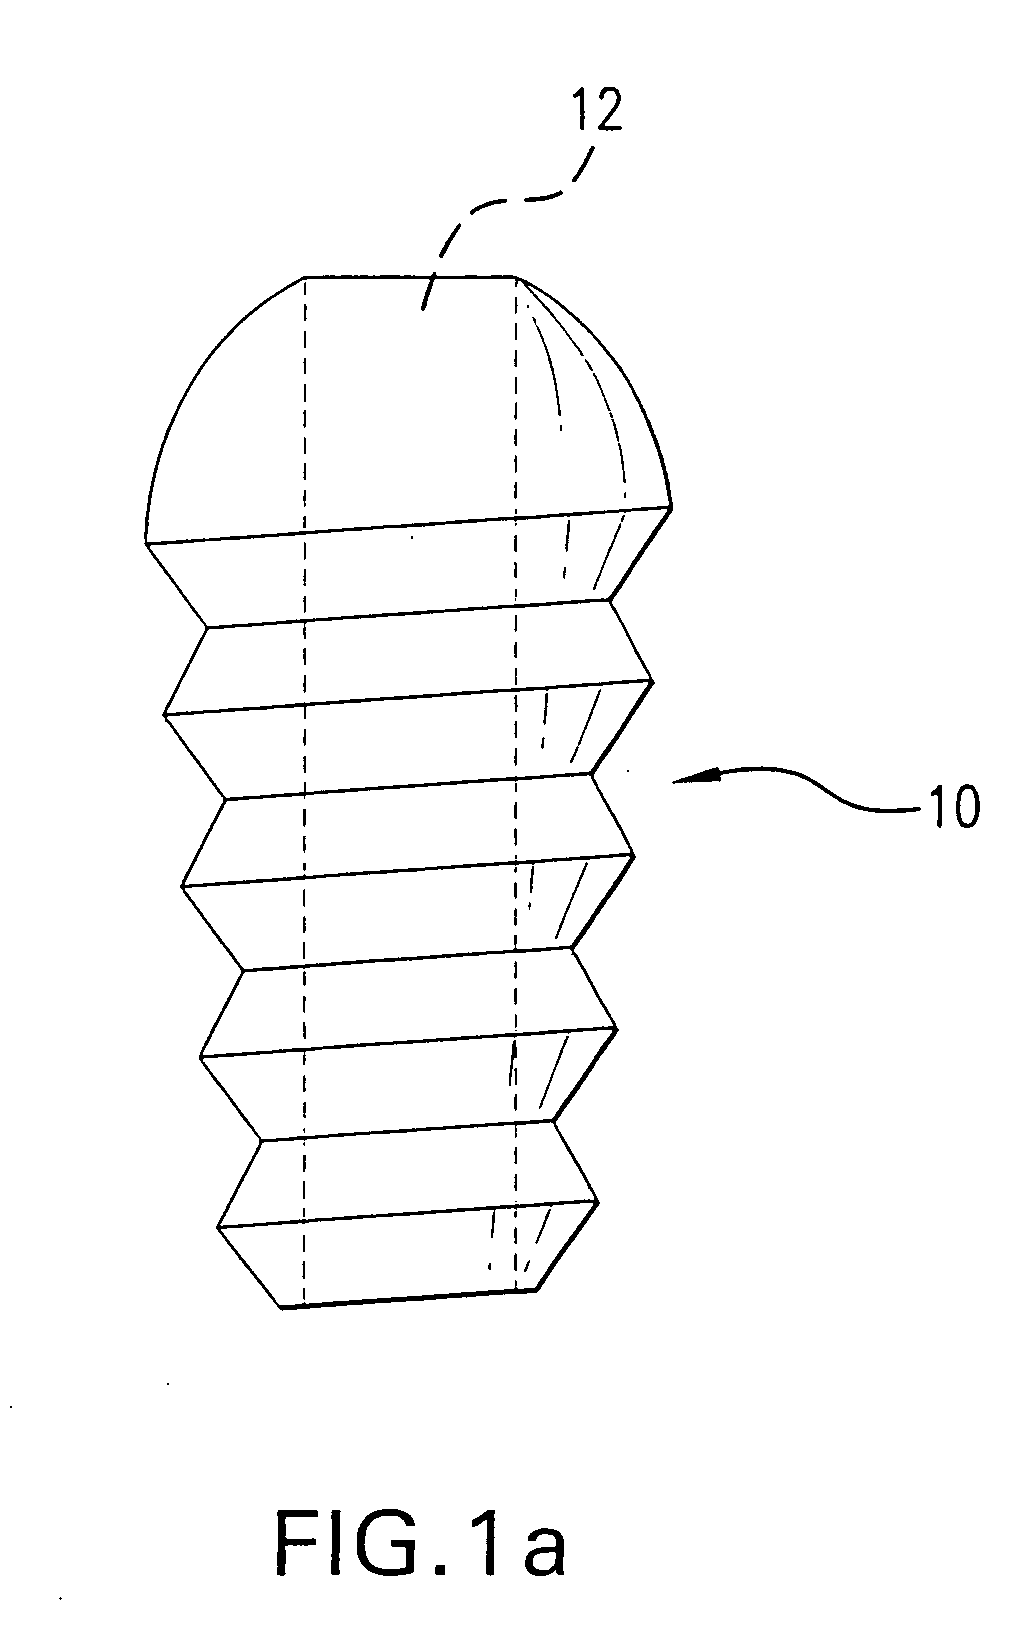 Method and device for securing sutures to bones